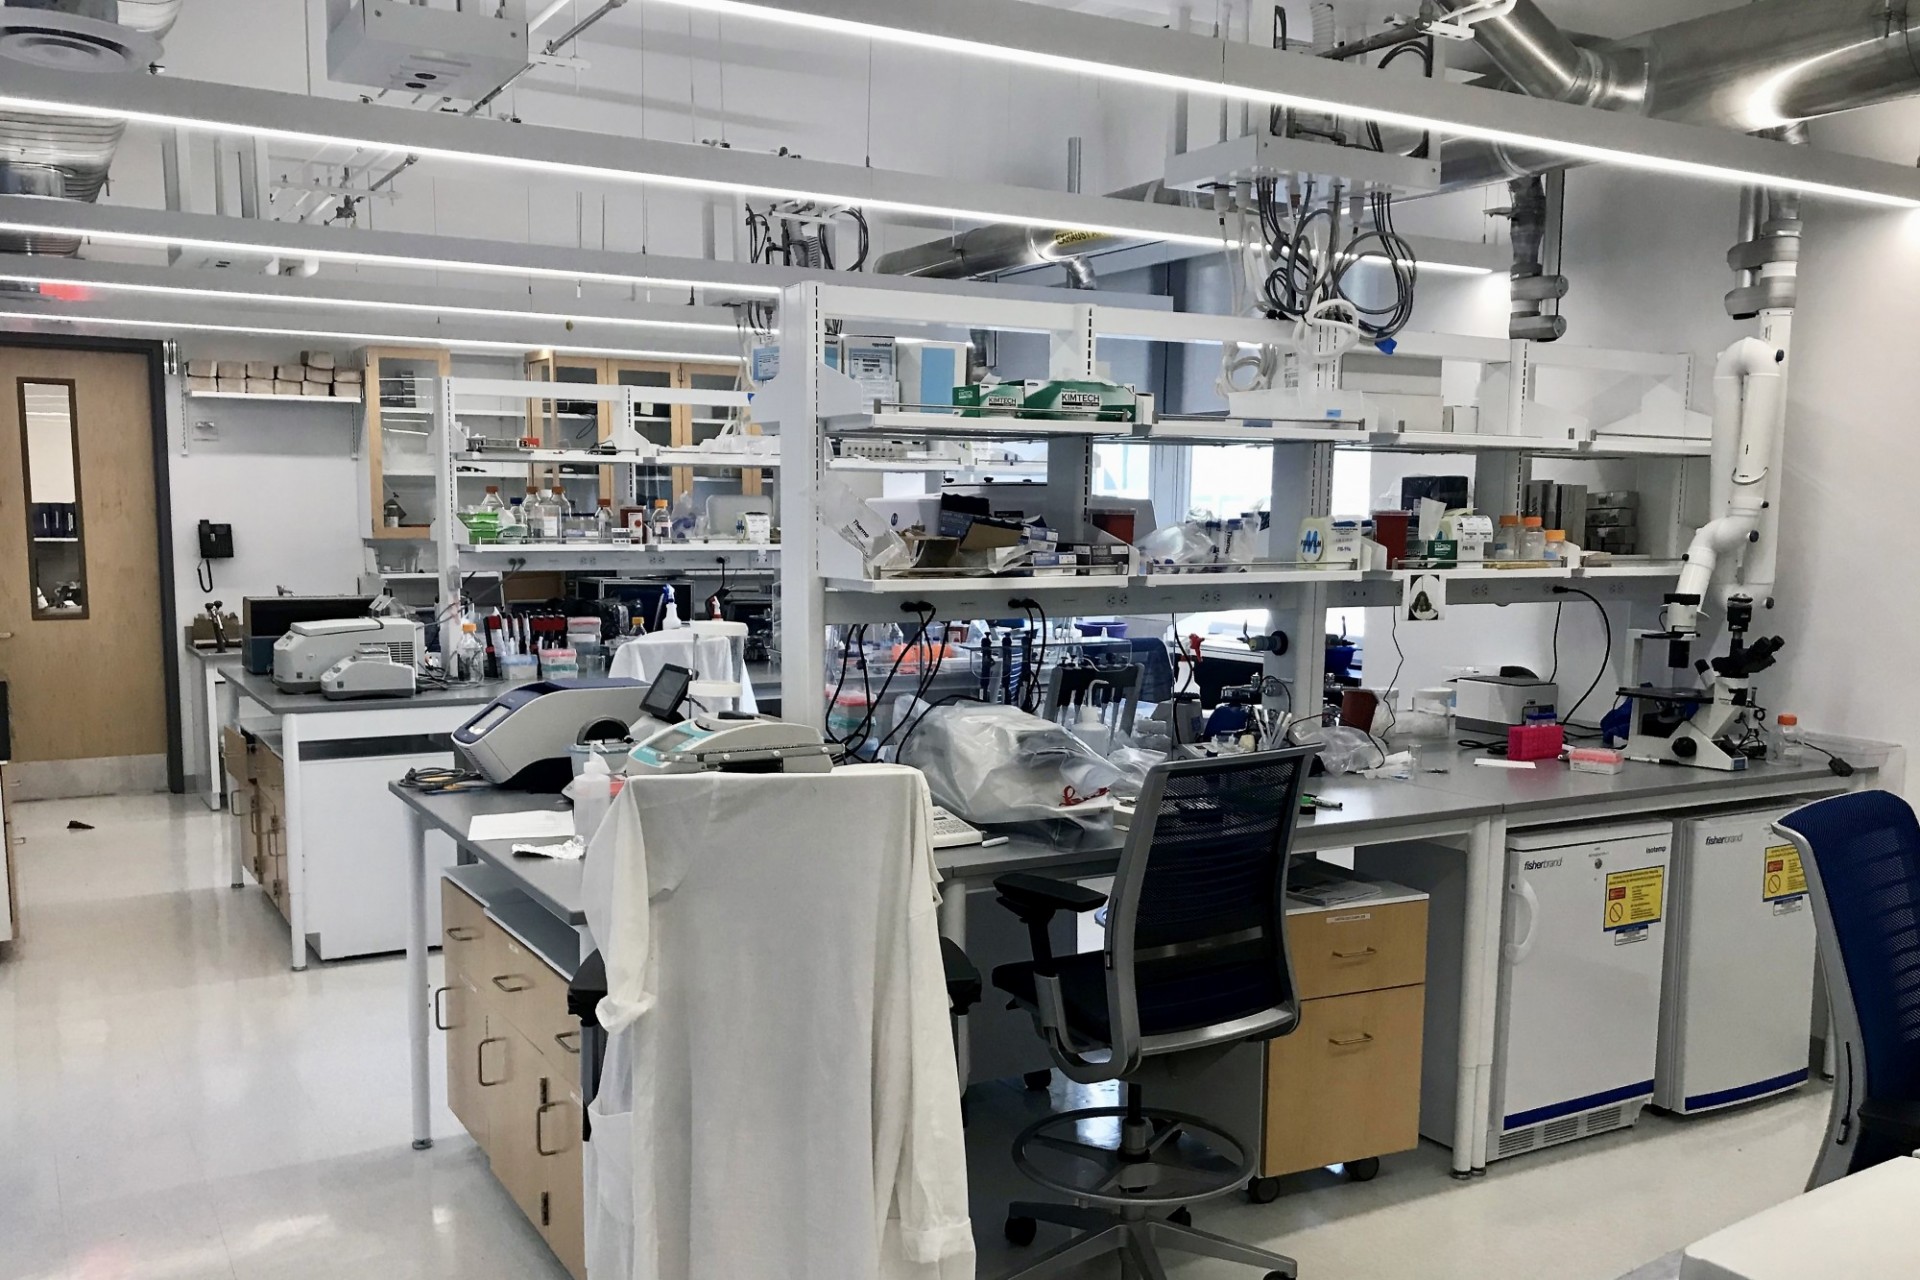 A refreshed lab with white finishes, full of equipment.